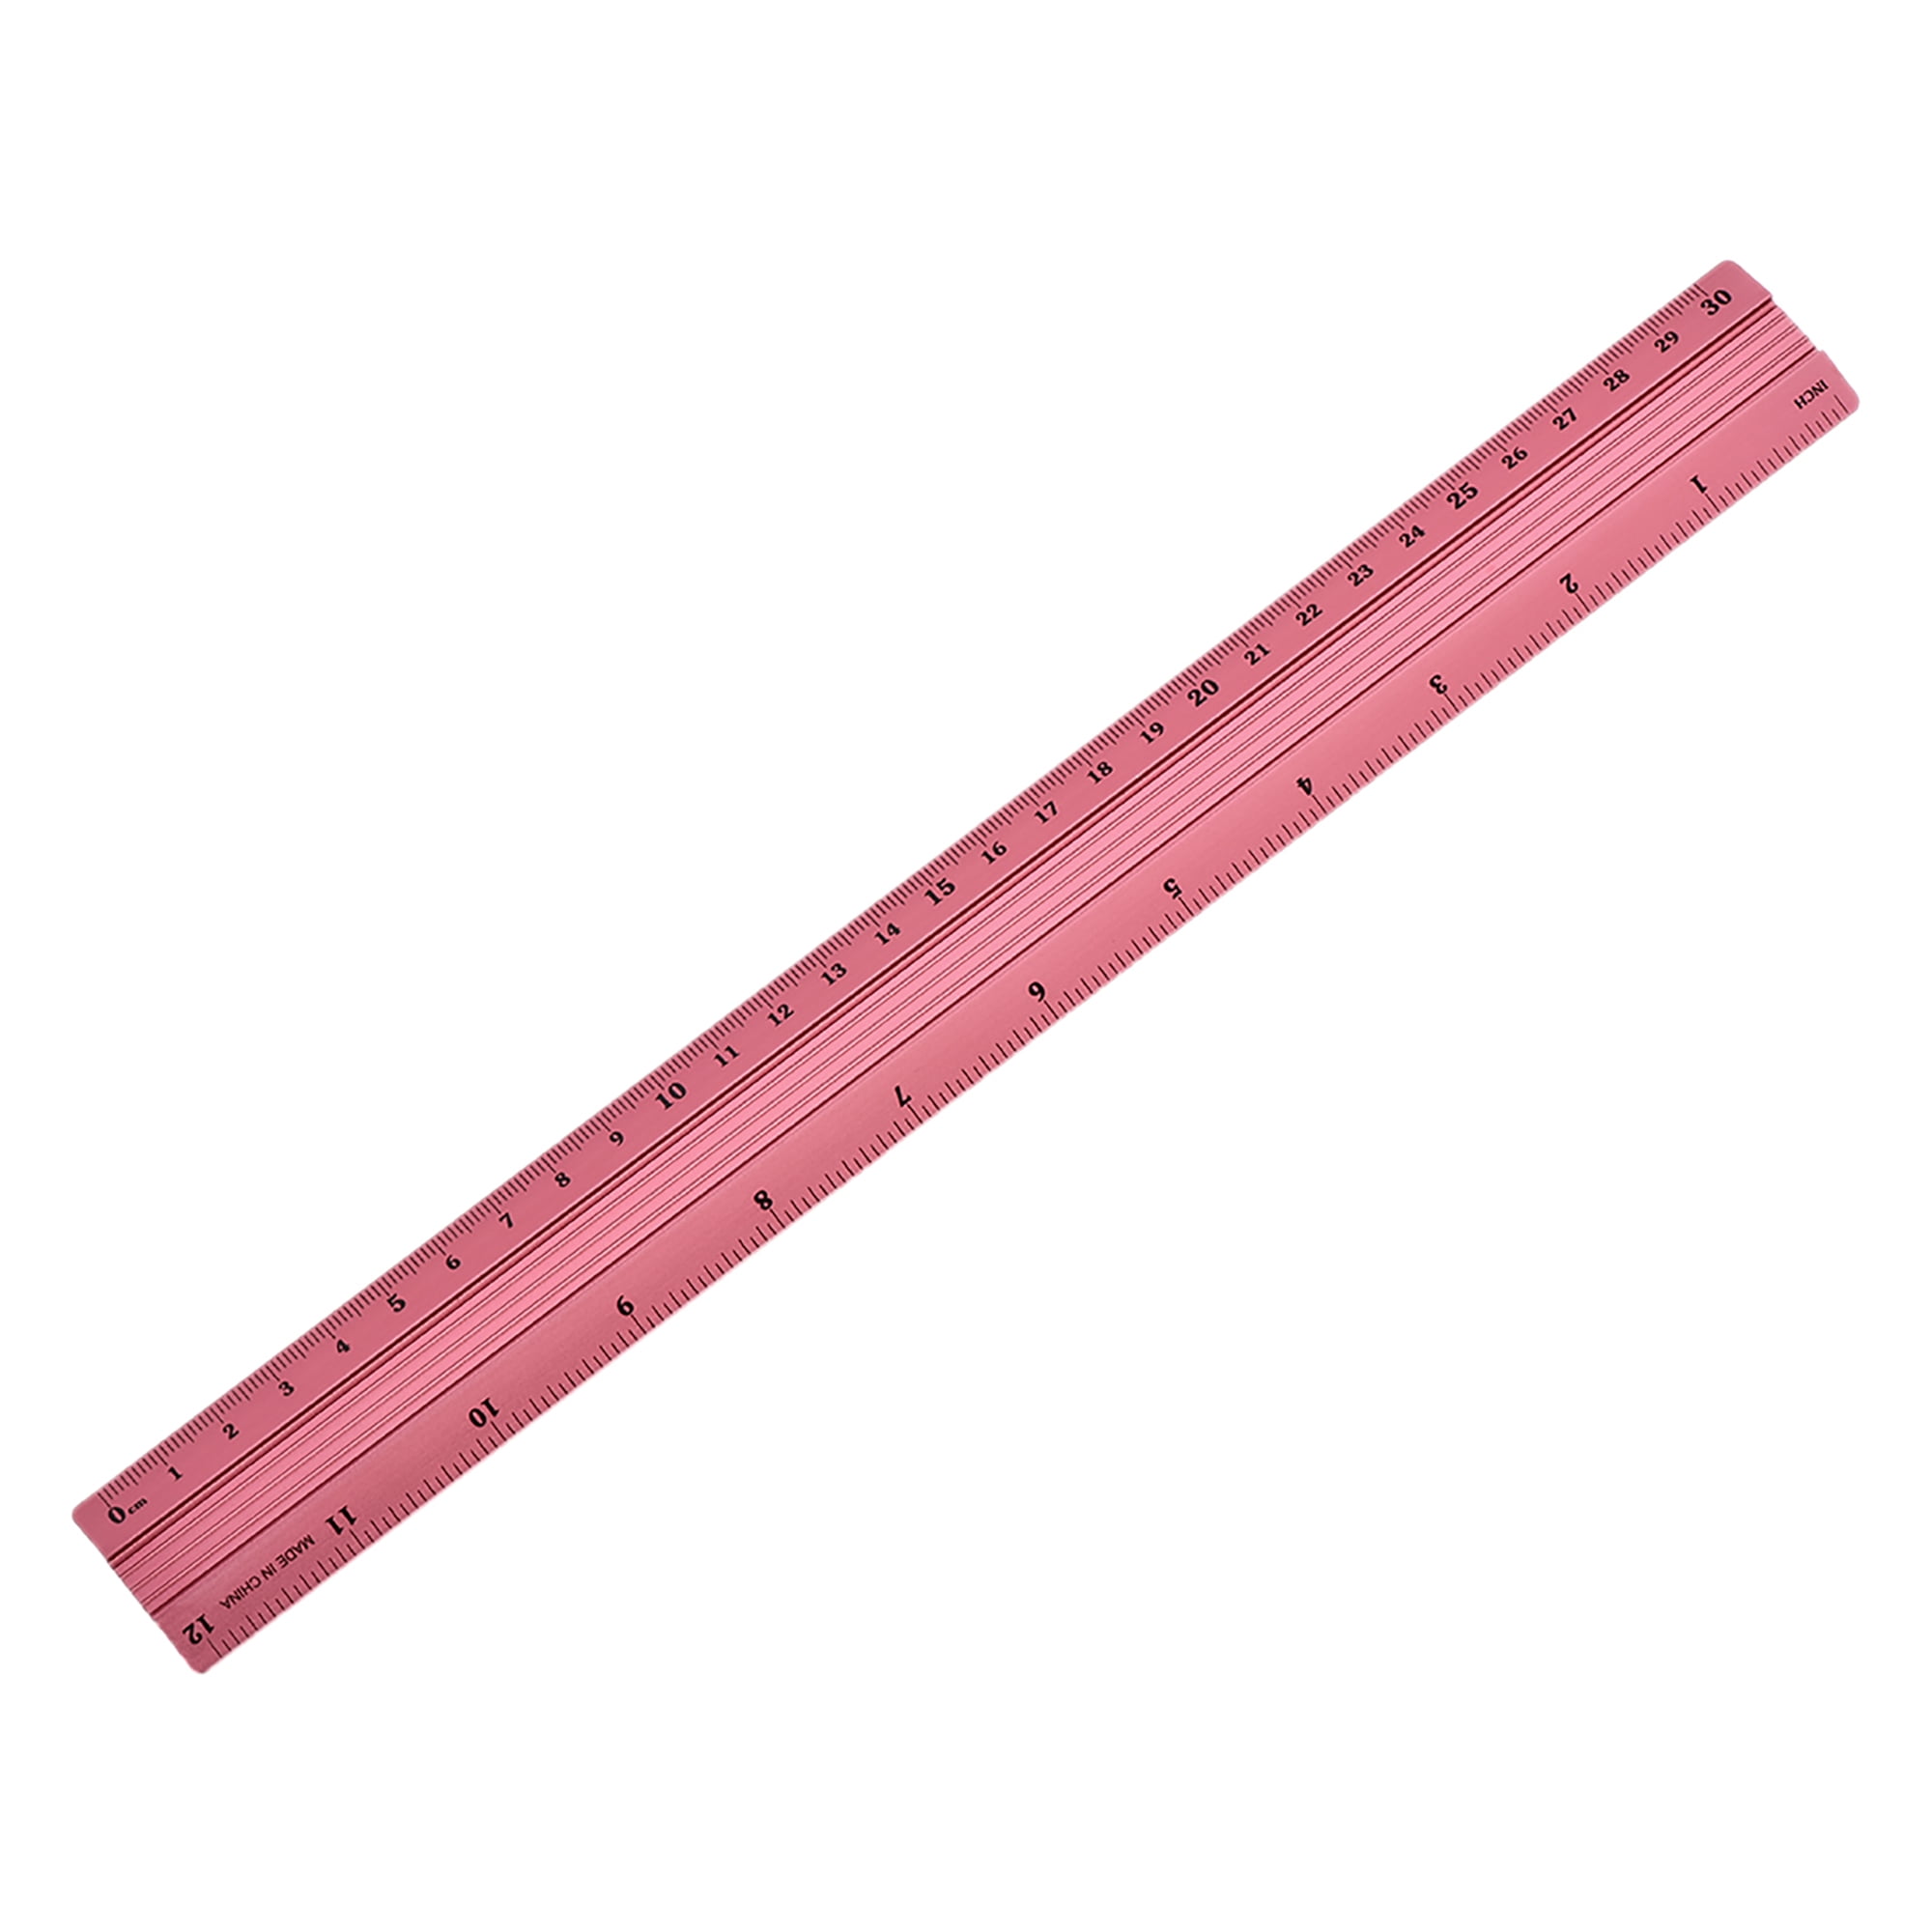 Aluminium Rulers, 300mm 12 Inch Architectural Scale Ruler, Professional  Measuring Ruler for Blueprint Draft, Gold Tone 